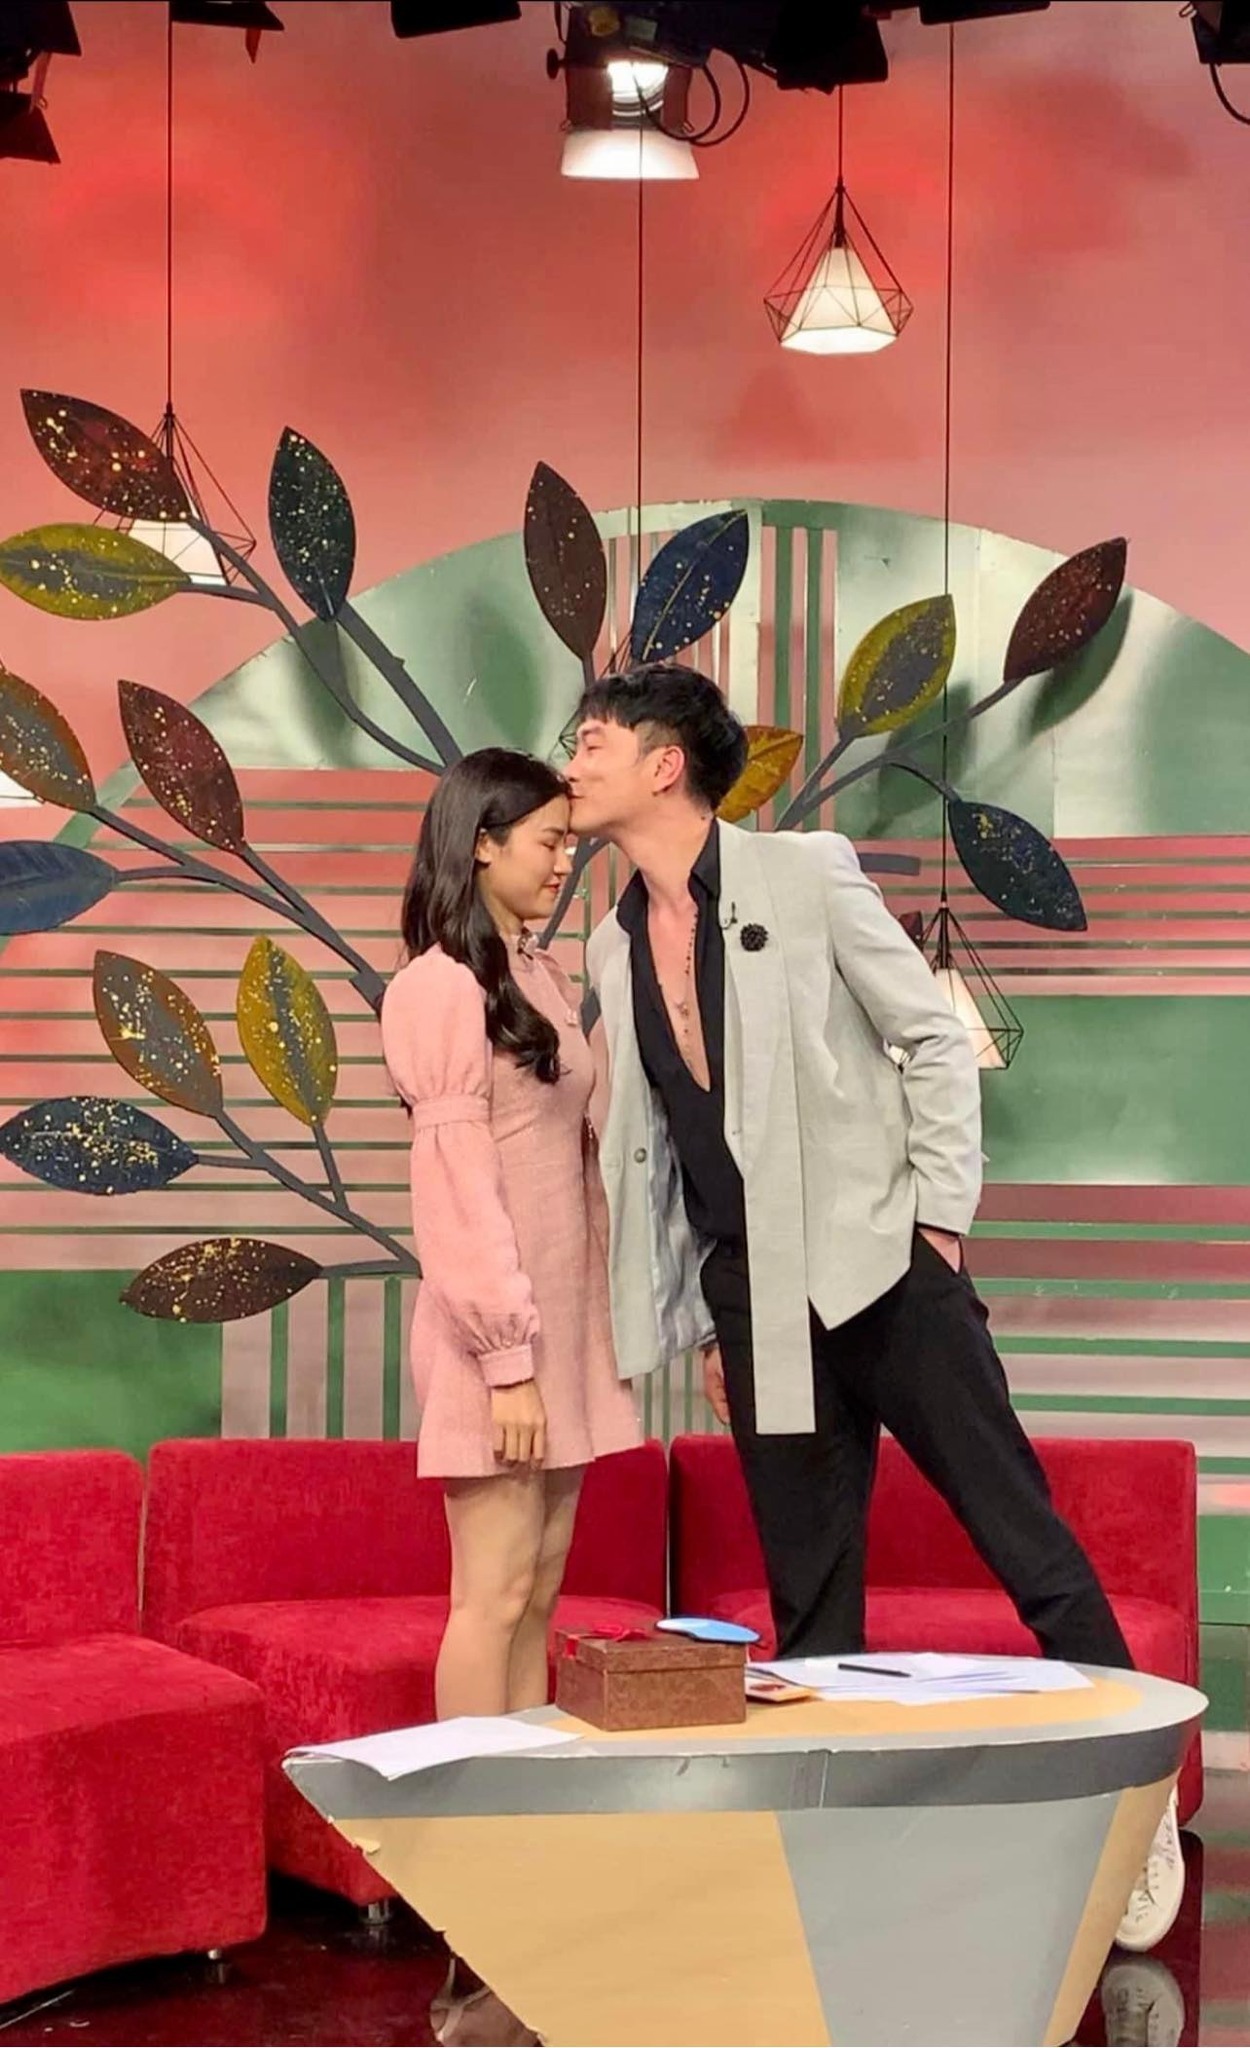 Trong Lan takes the lead role The way to the flower land after making a mistake, revealing his true feelings for his co-star Anh Dao